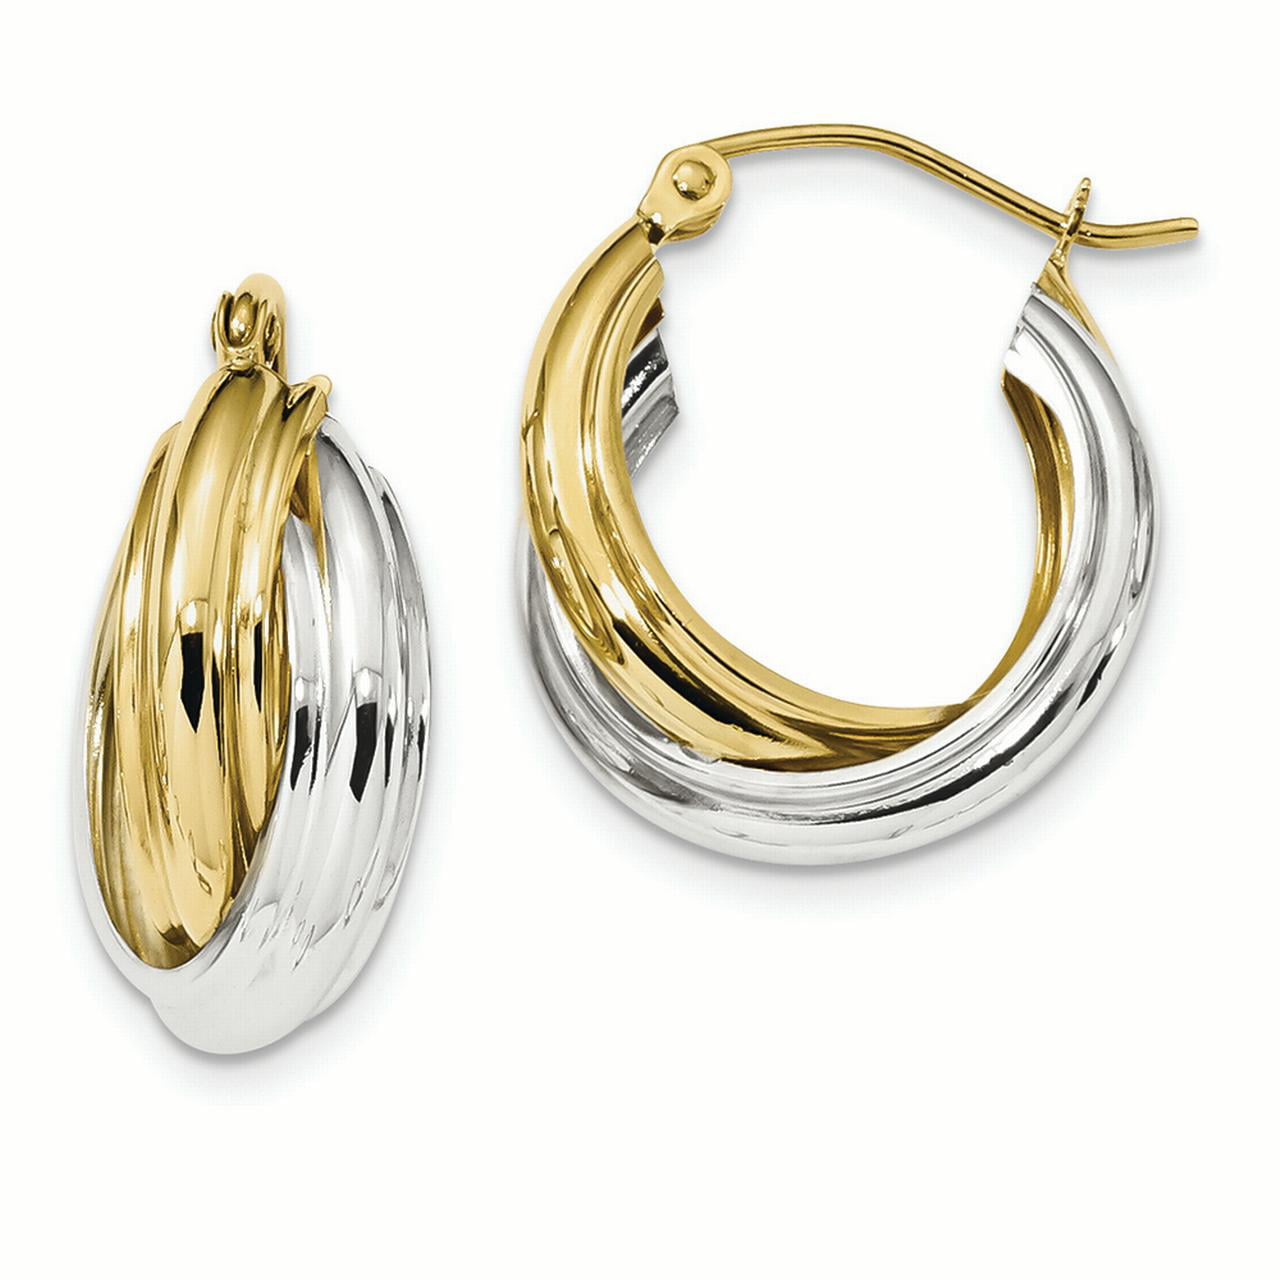 Earring Hoop - 10K White And Yellow Gold 8 MM Polished Double Tube ...